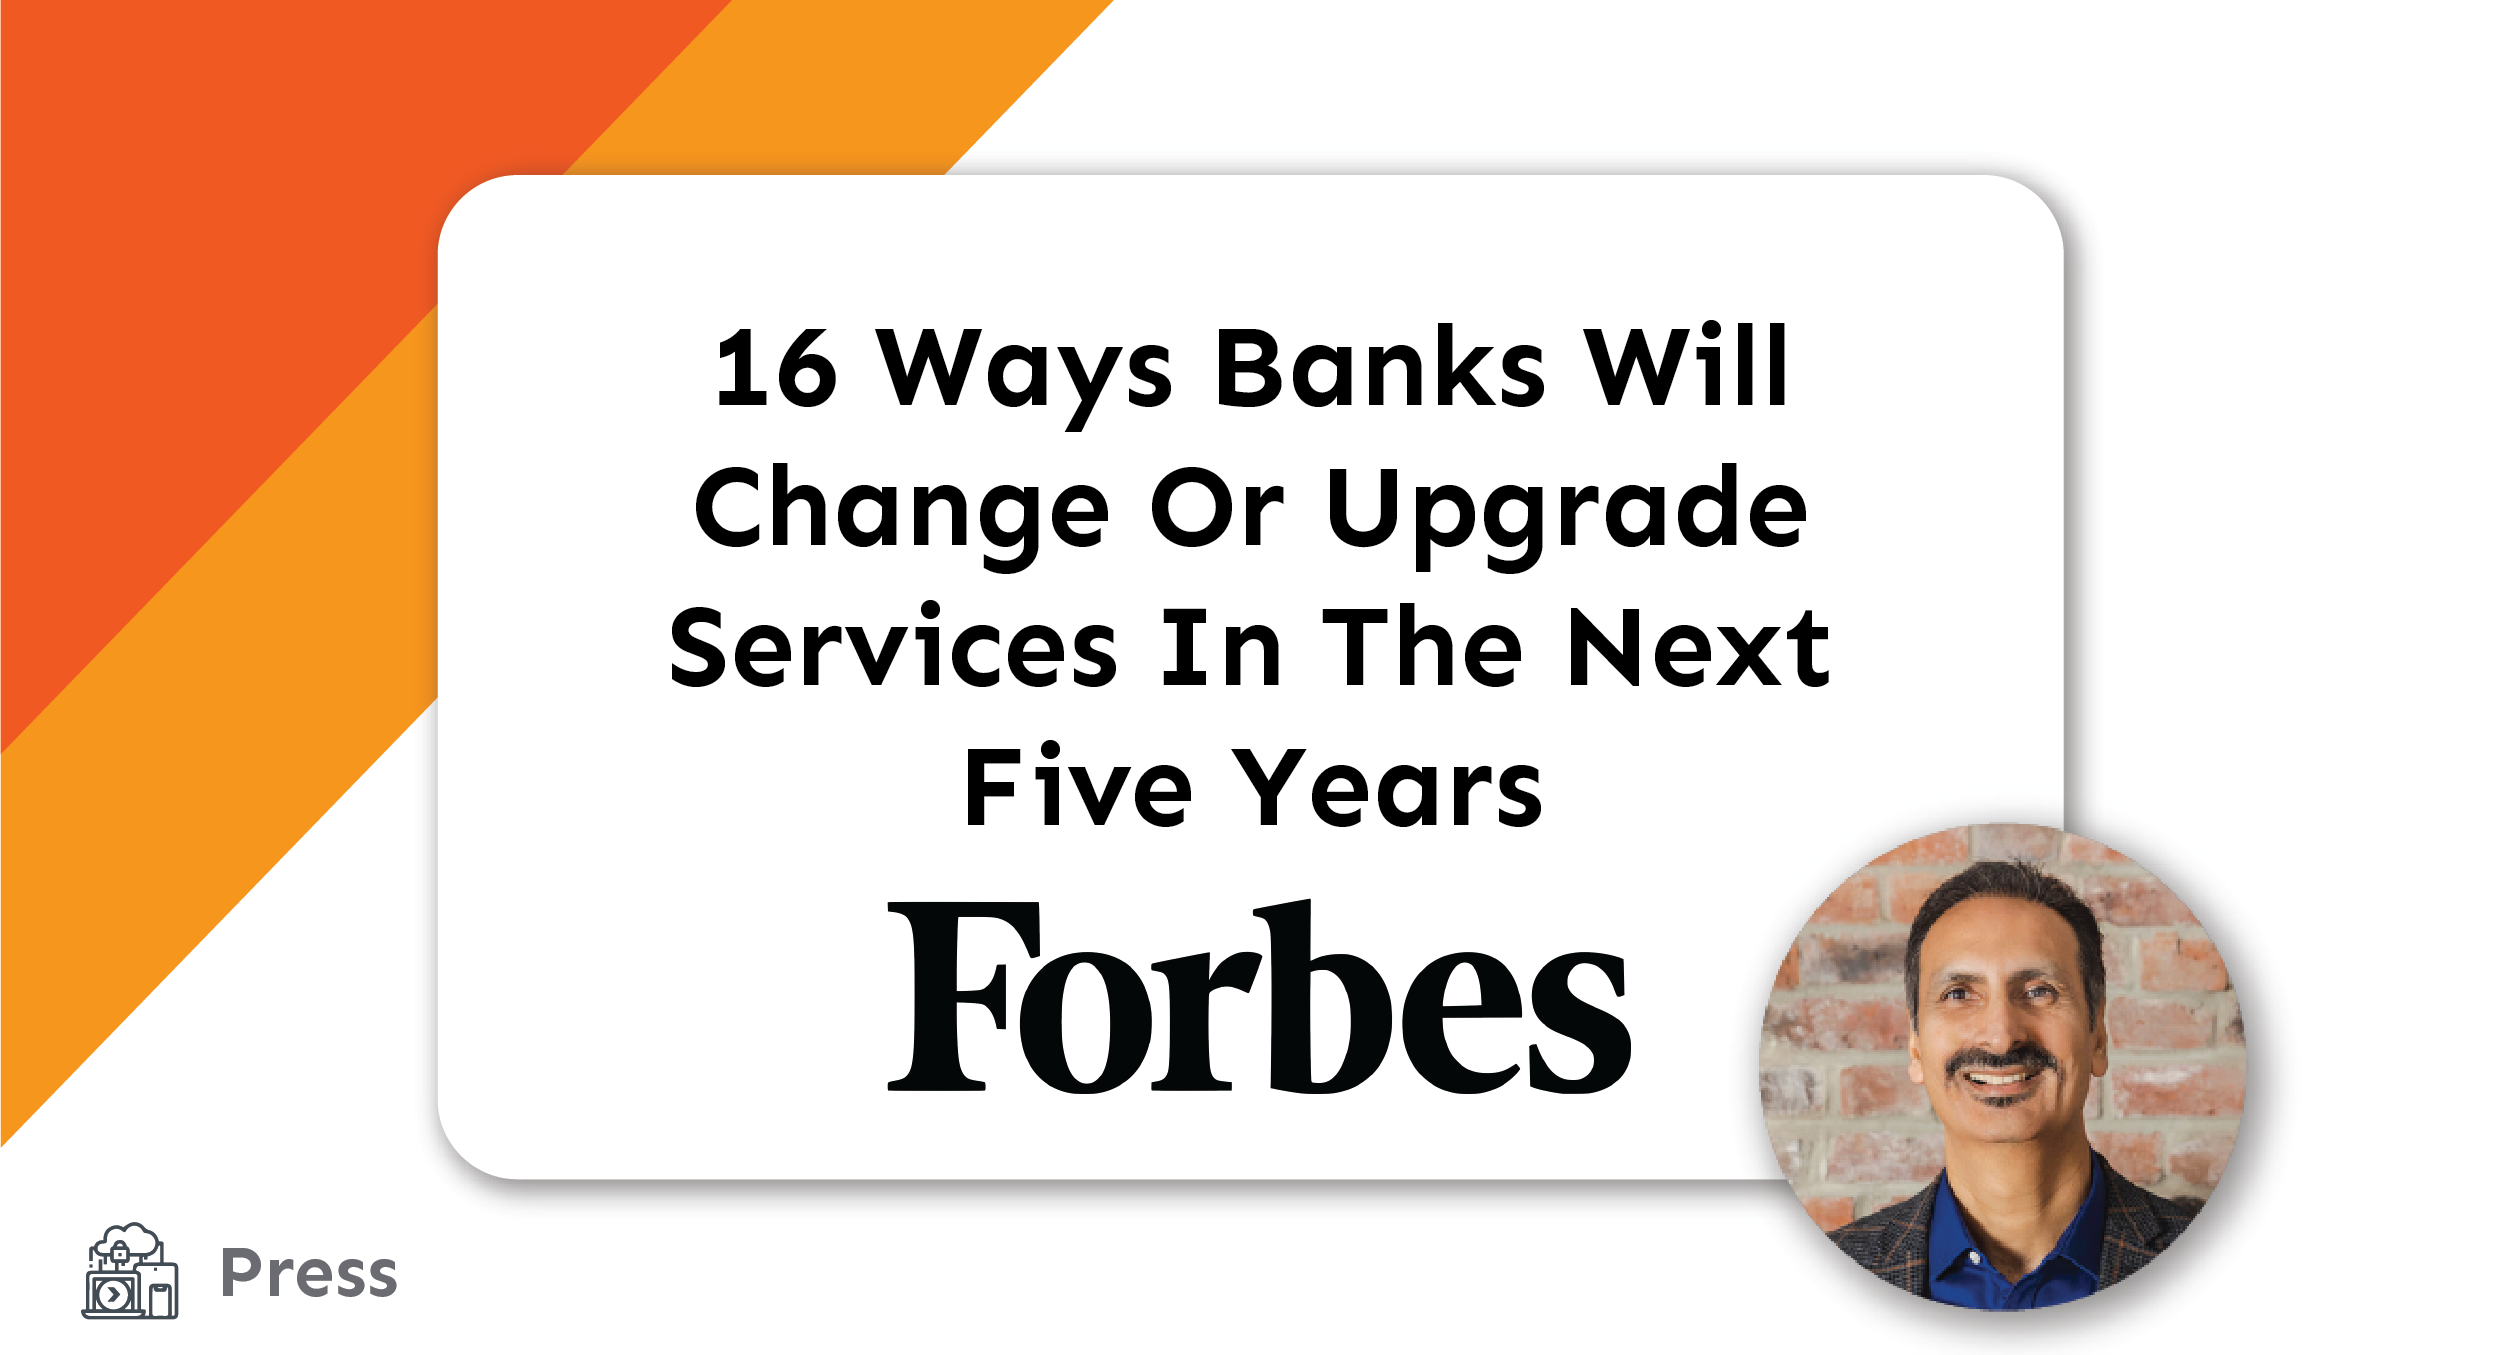 Press - 16 Ways Banks Will Change Or Upgrade Services In The Next Five Years - Title Card